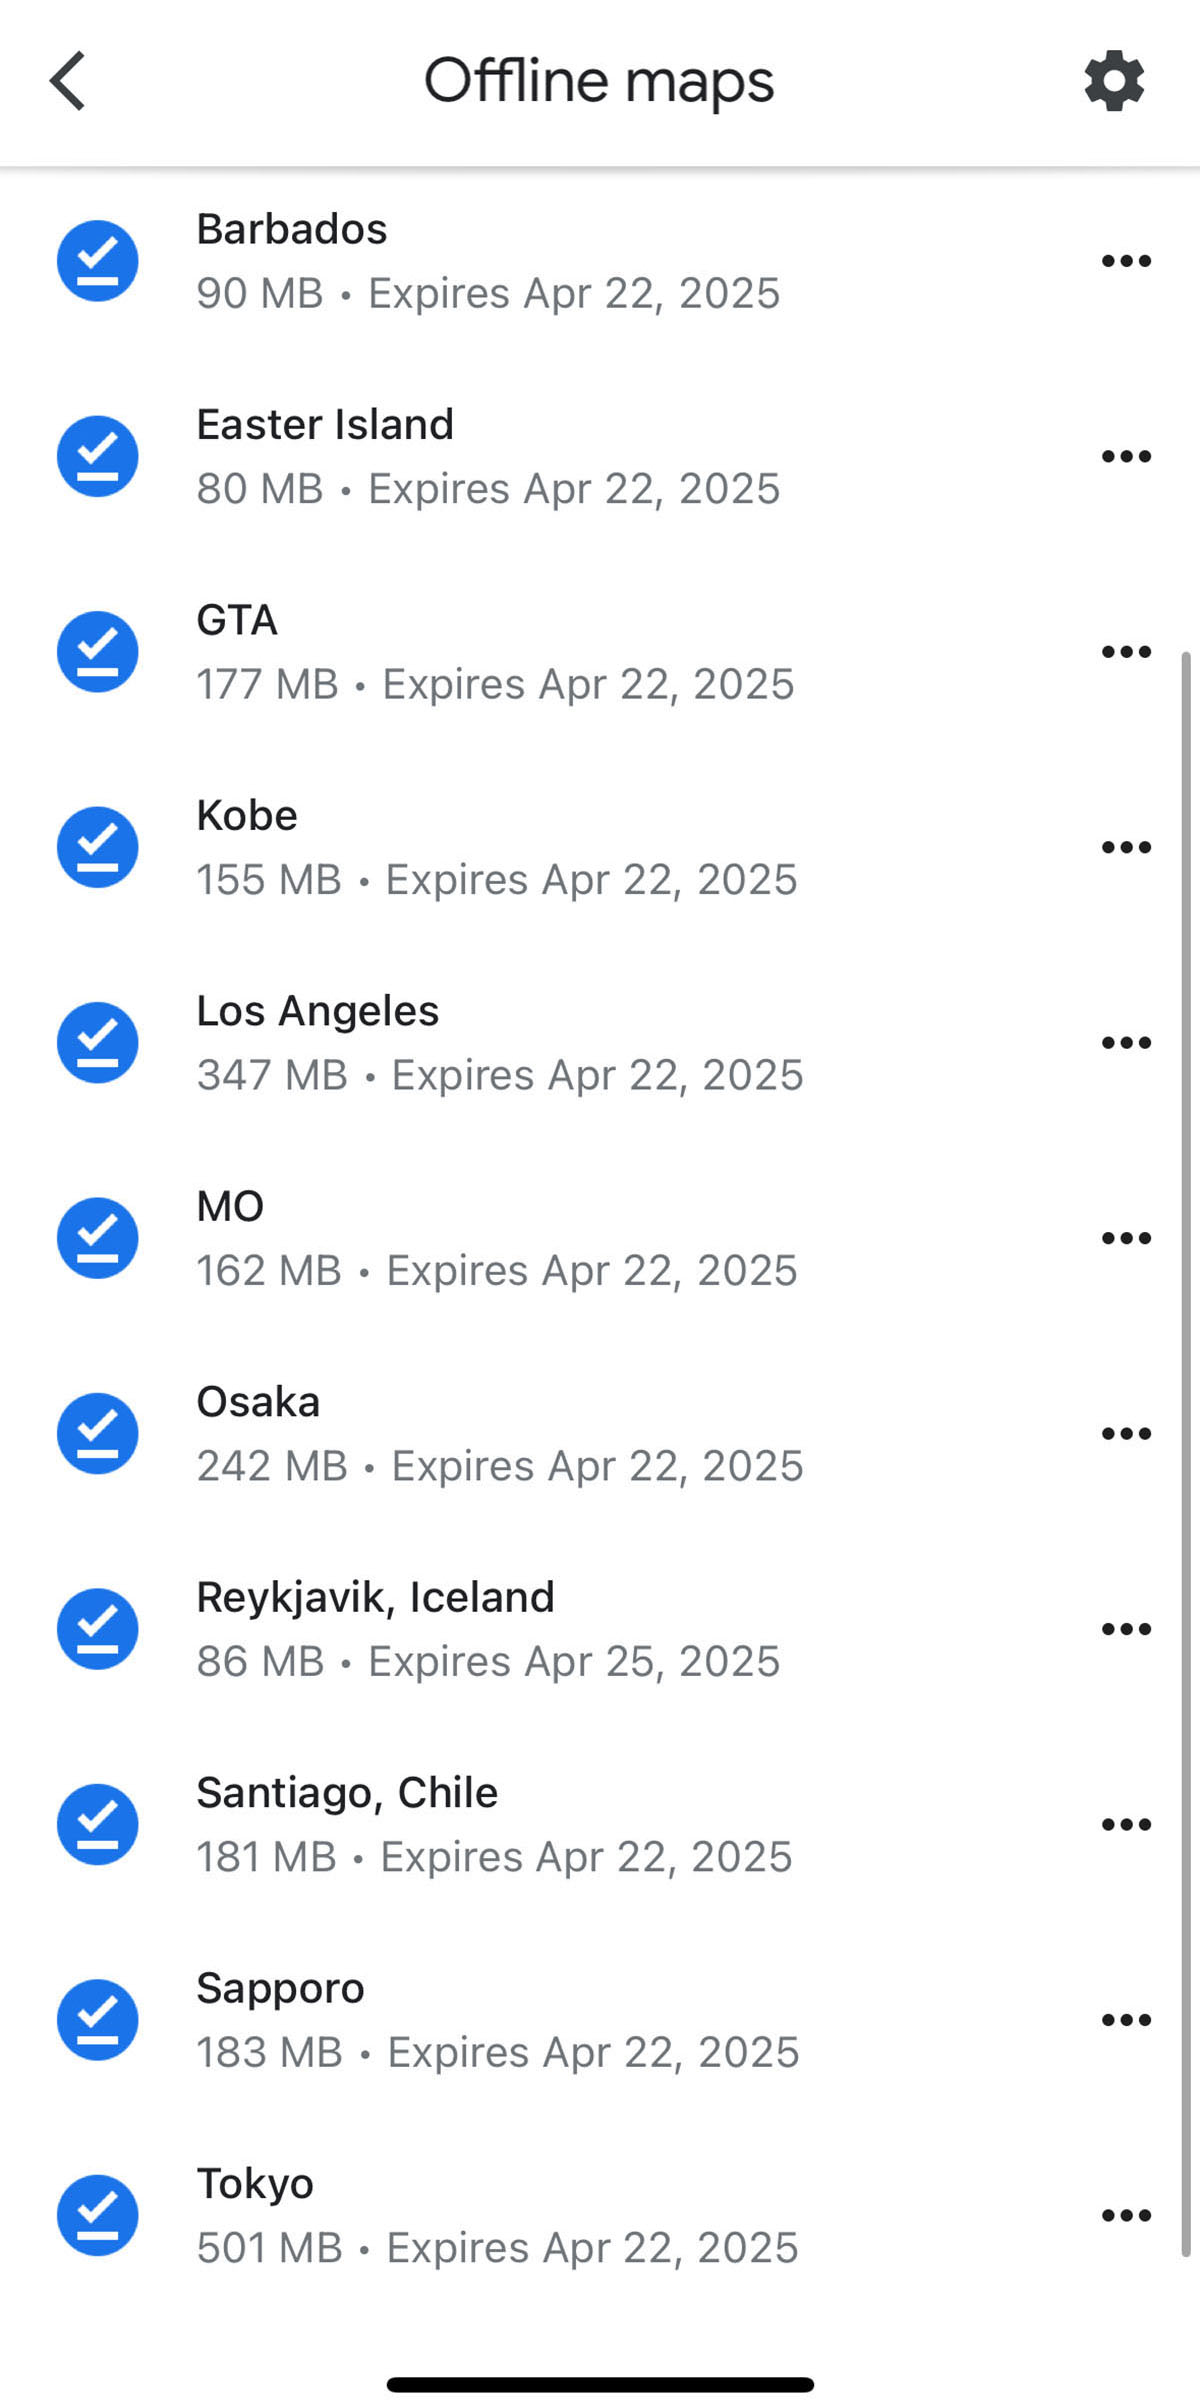 list of all offline google maps saved in profile